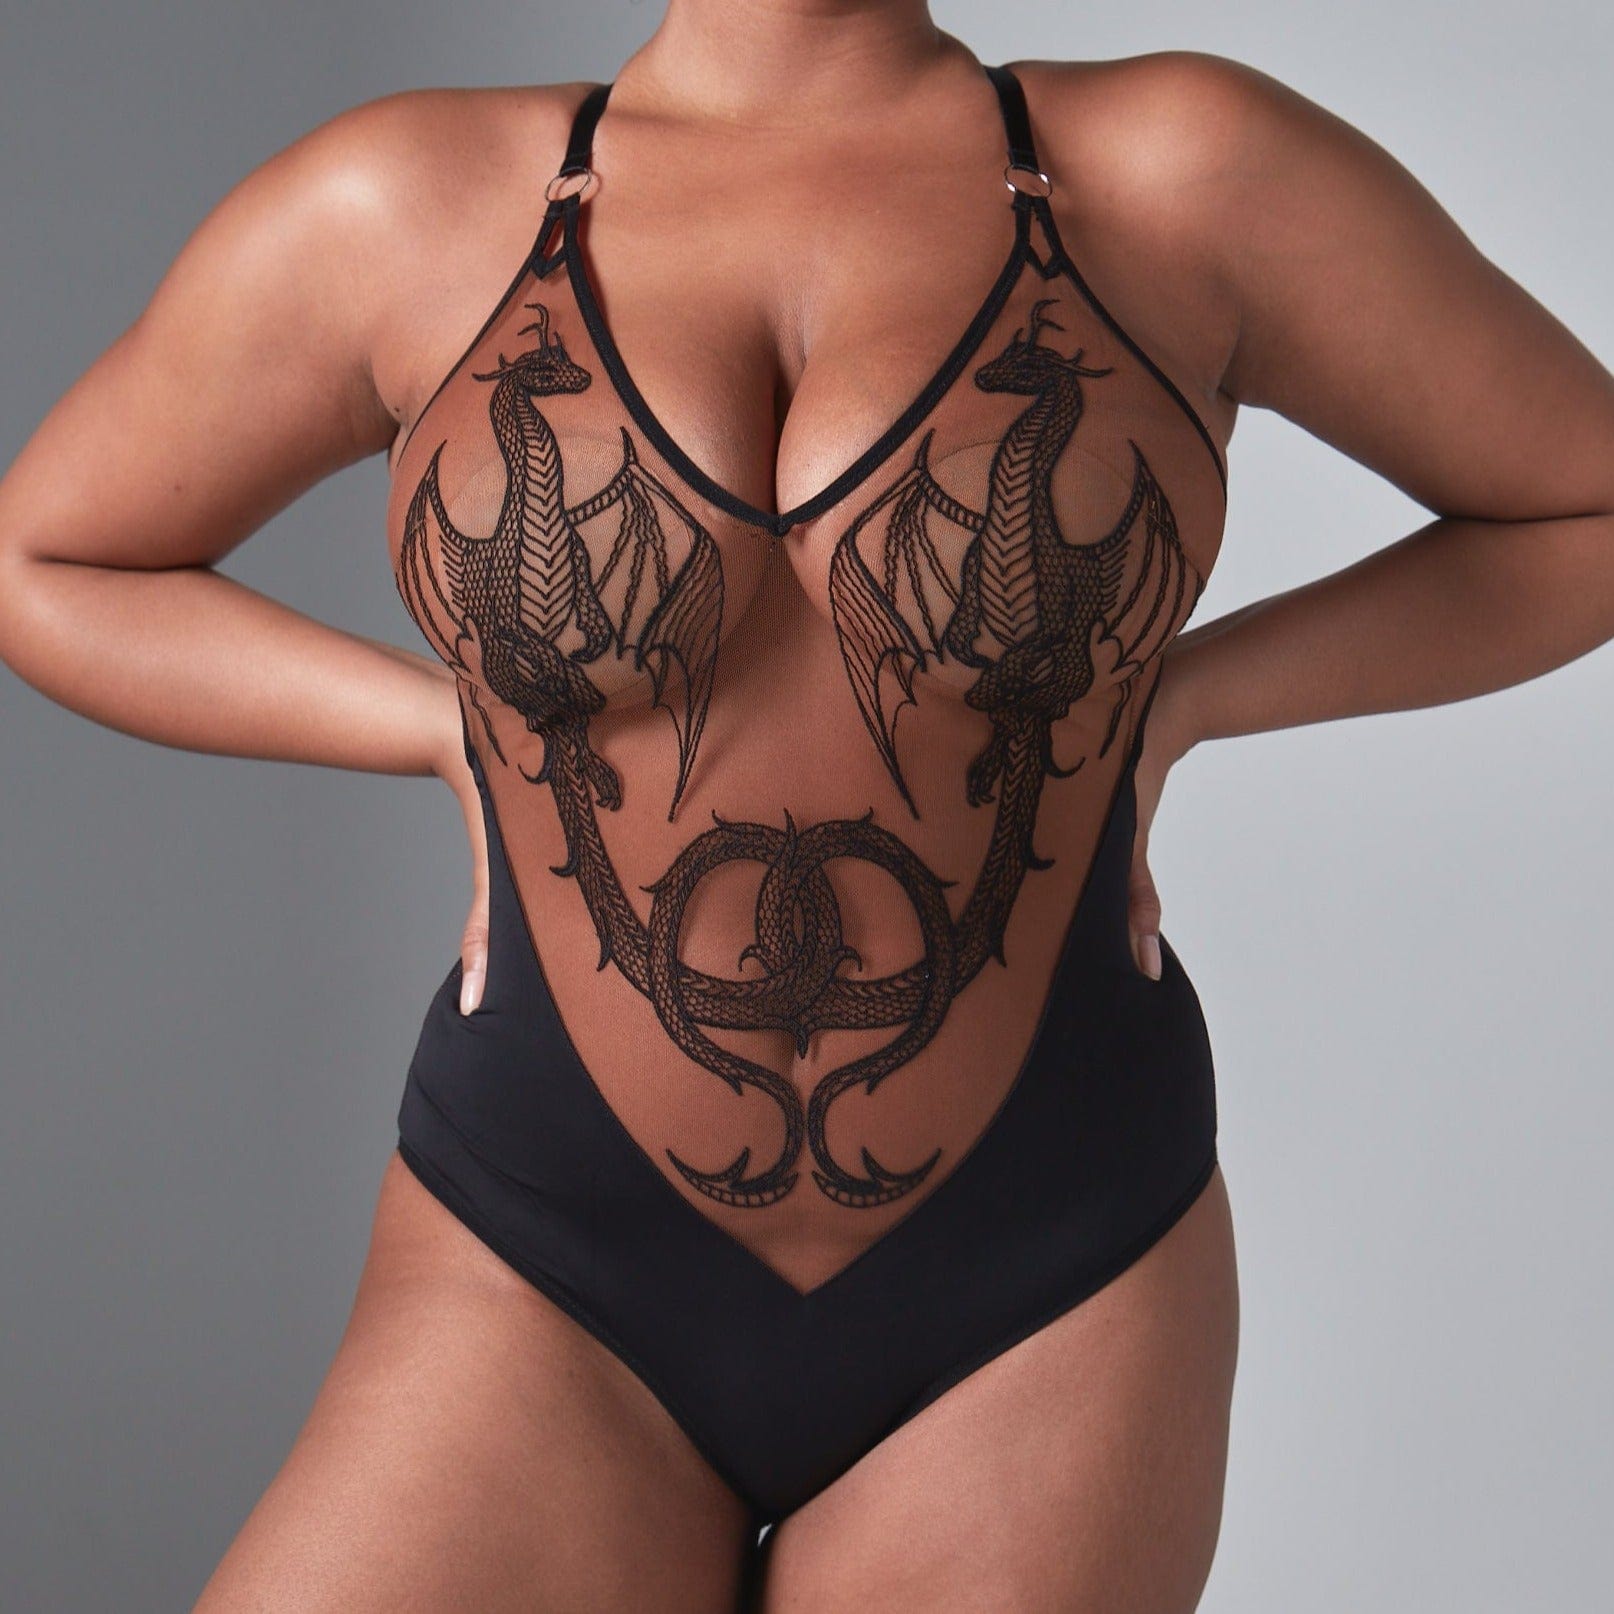 Best Sellers Thistle and Spire Lingerie